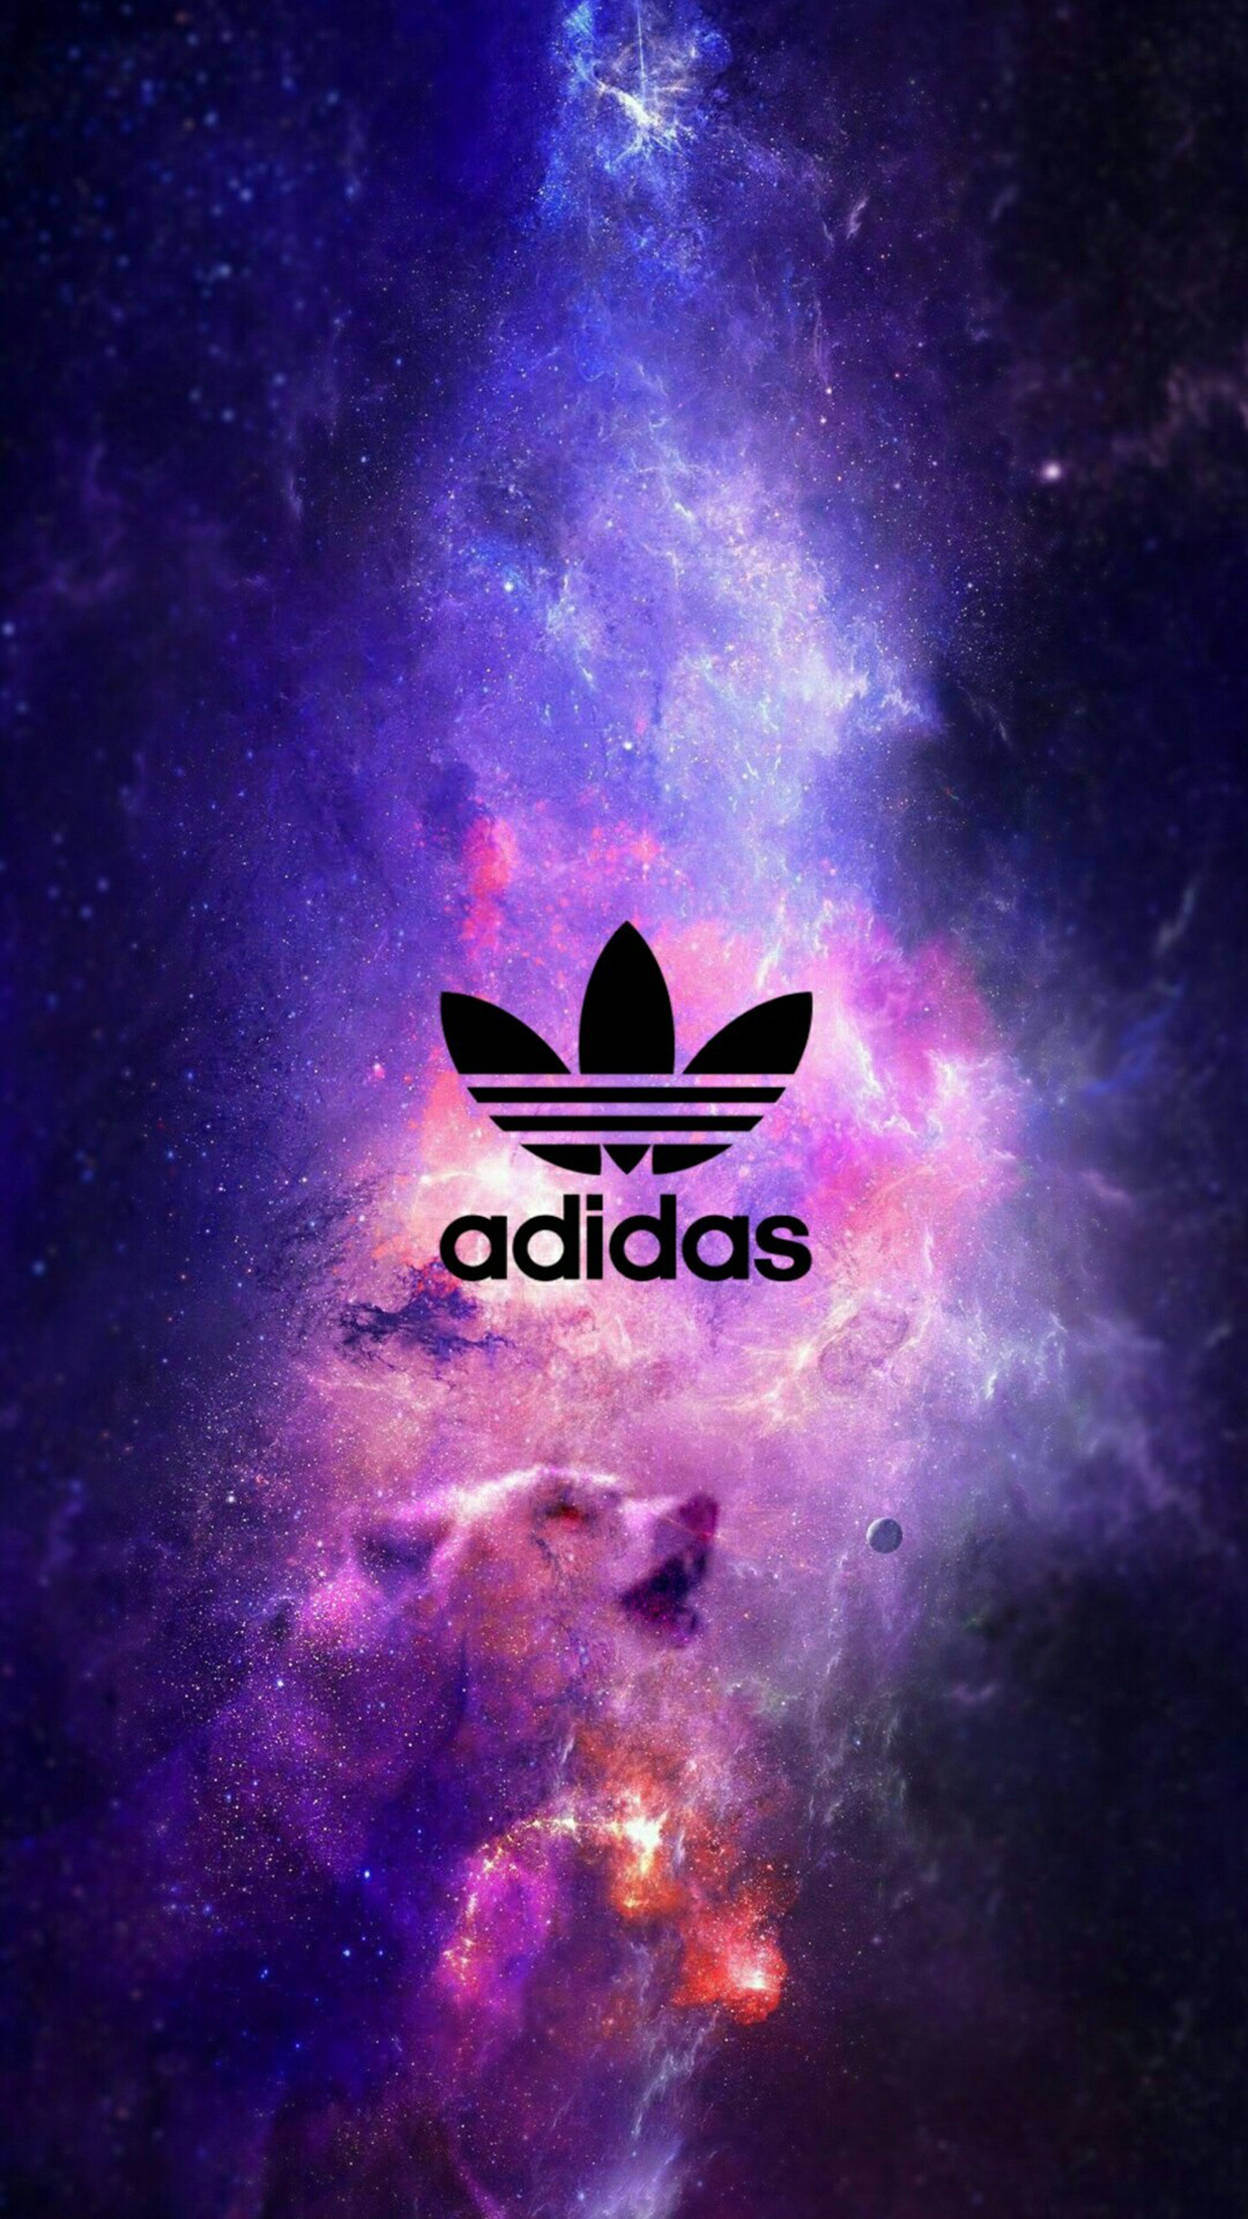 Download Adidas Galaxy Dope Iphone Wallpaper Wallpapers Com